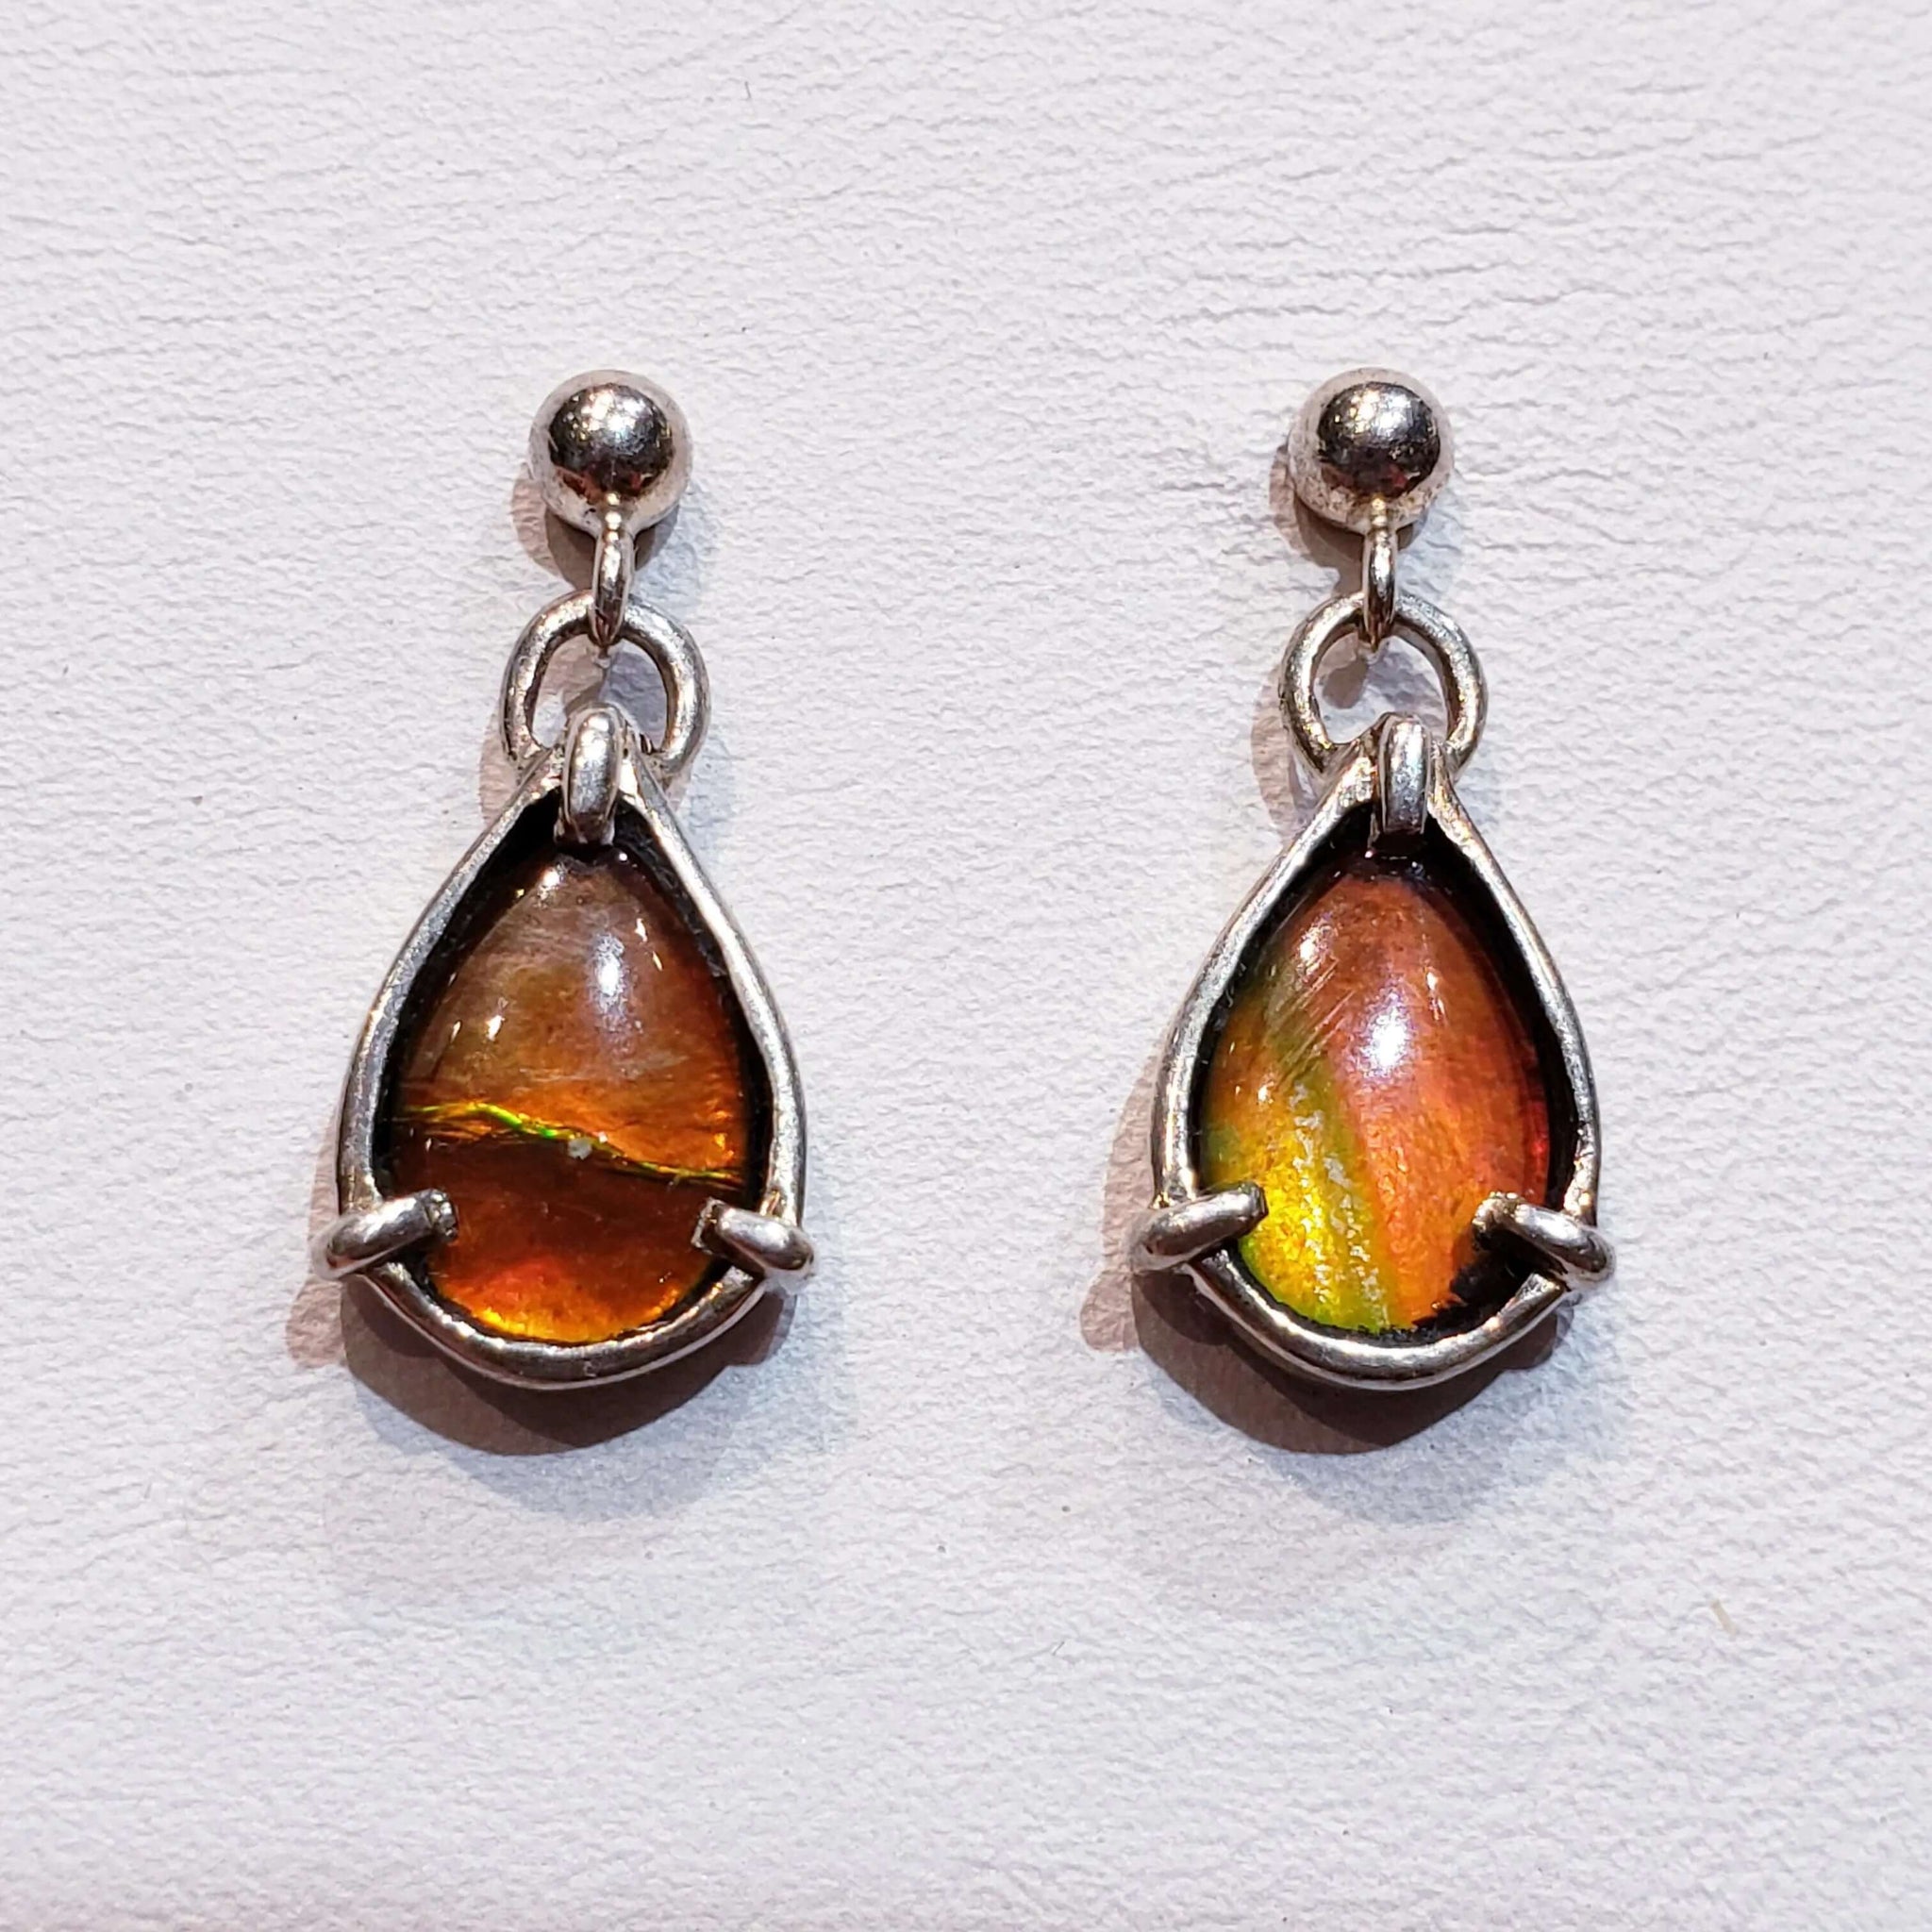 Ammolite PearDrop Earrings with Multiple Colors PN. E10661 %product from Empire Ammolite